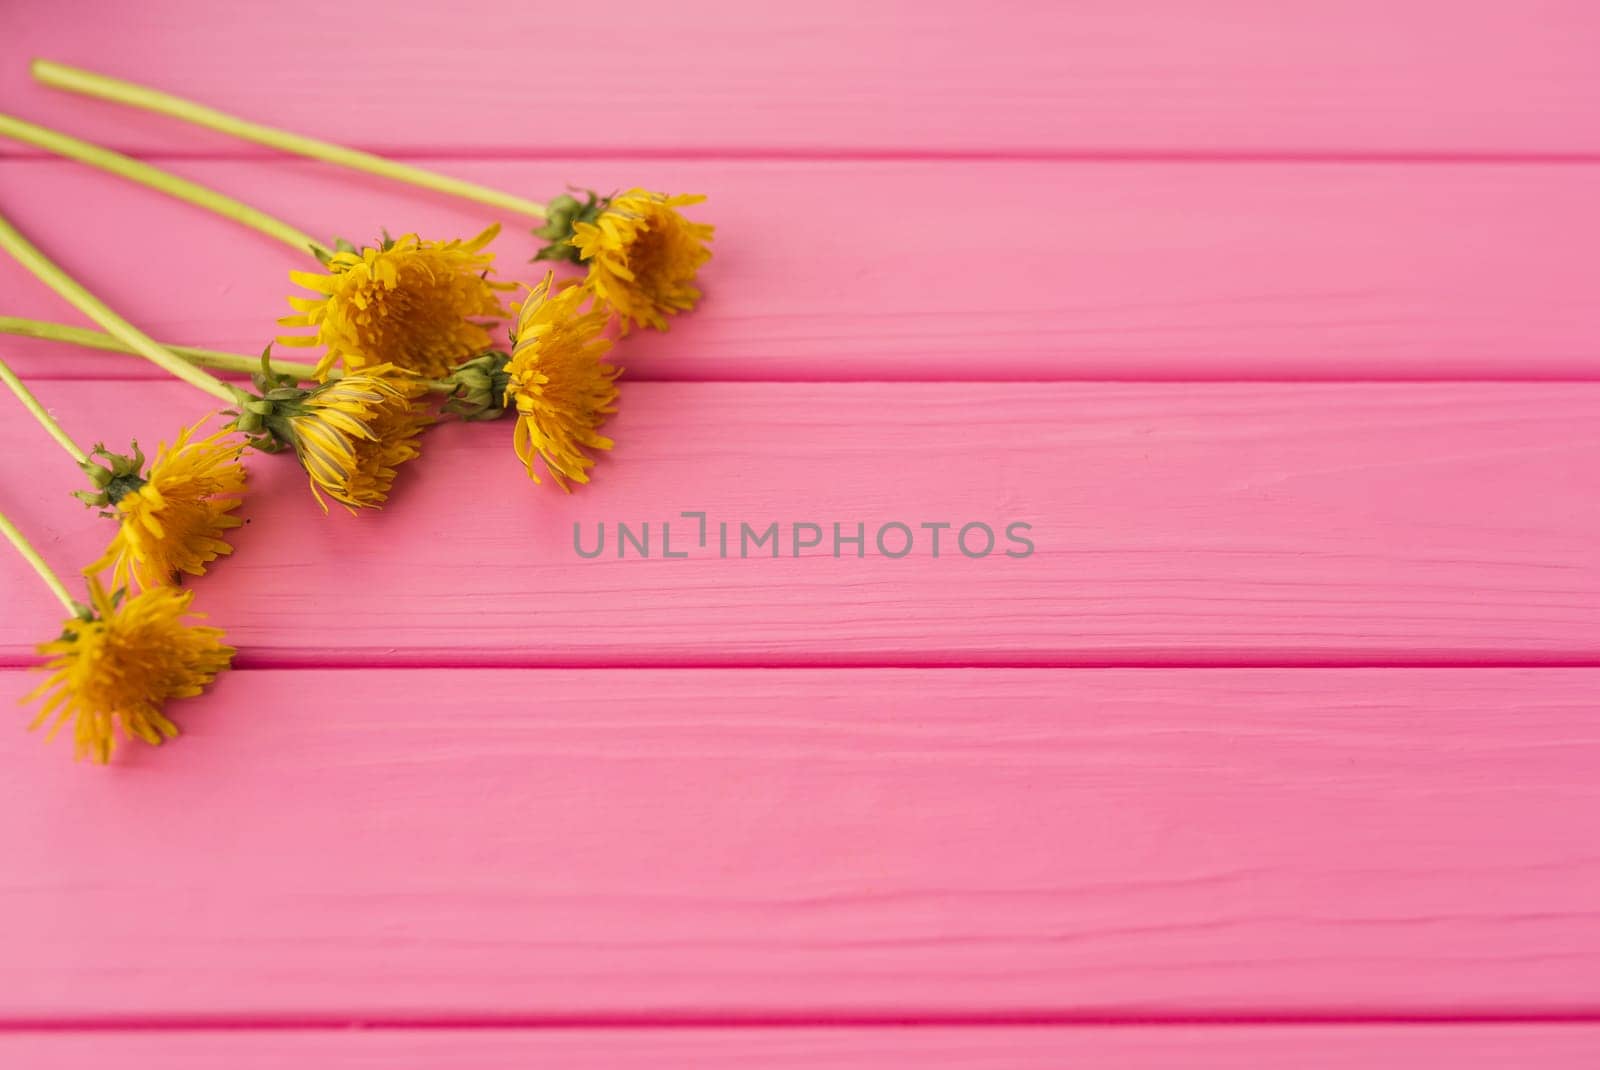 Summer abstract background mockup flowers borders frames yellow dandelions by AndriiDrachuk